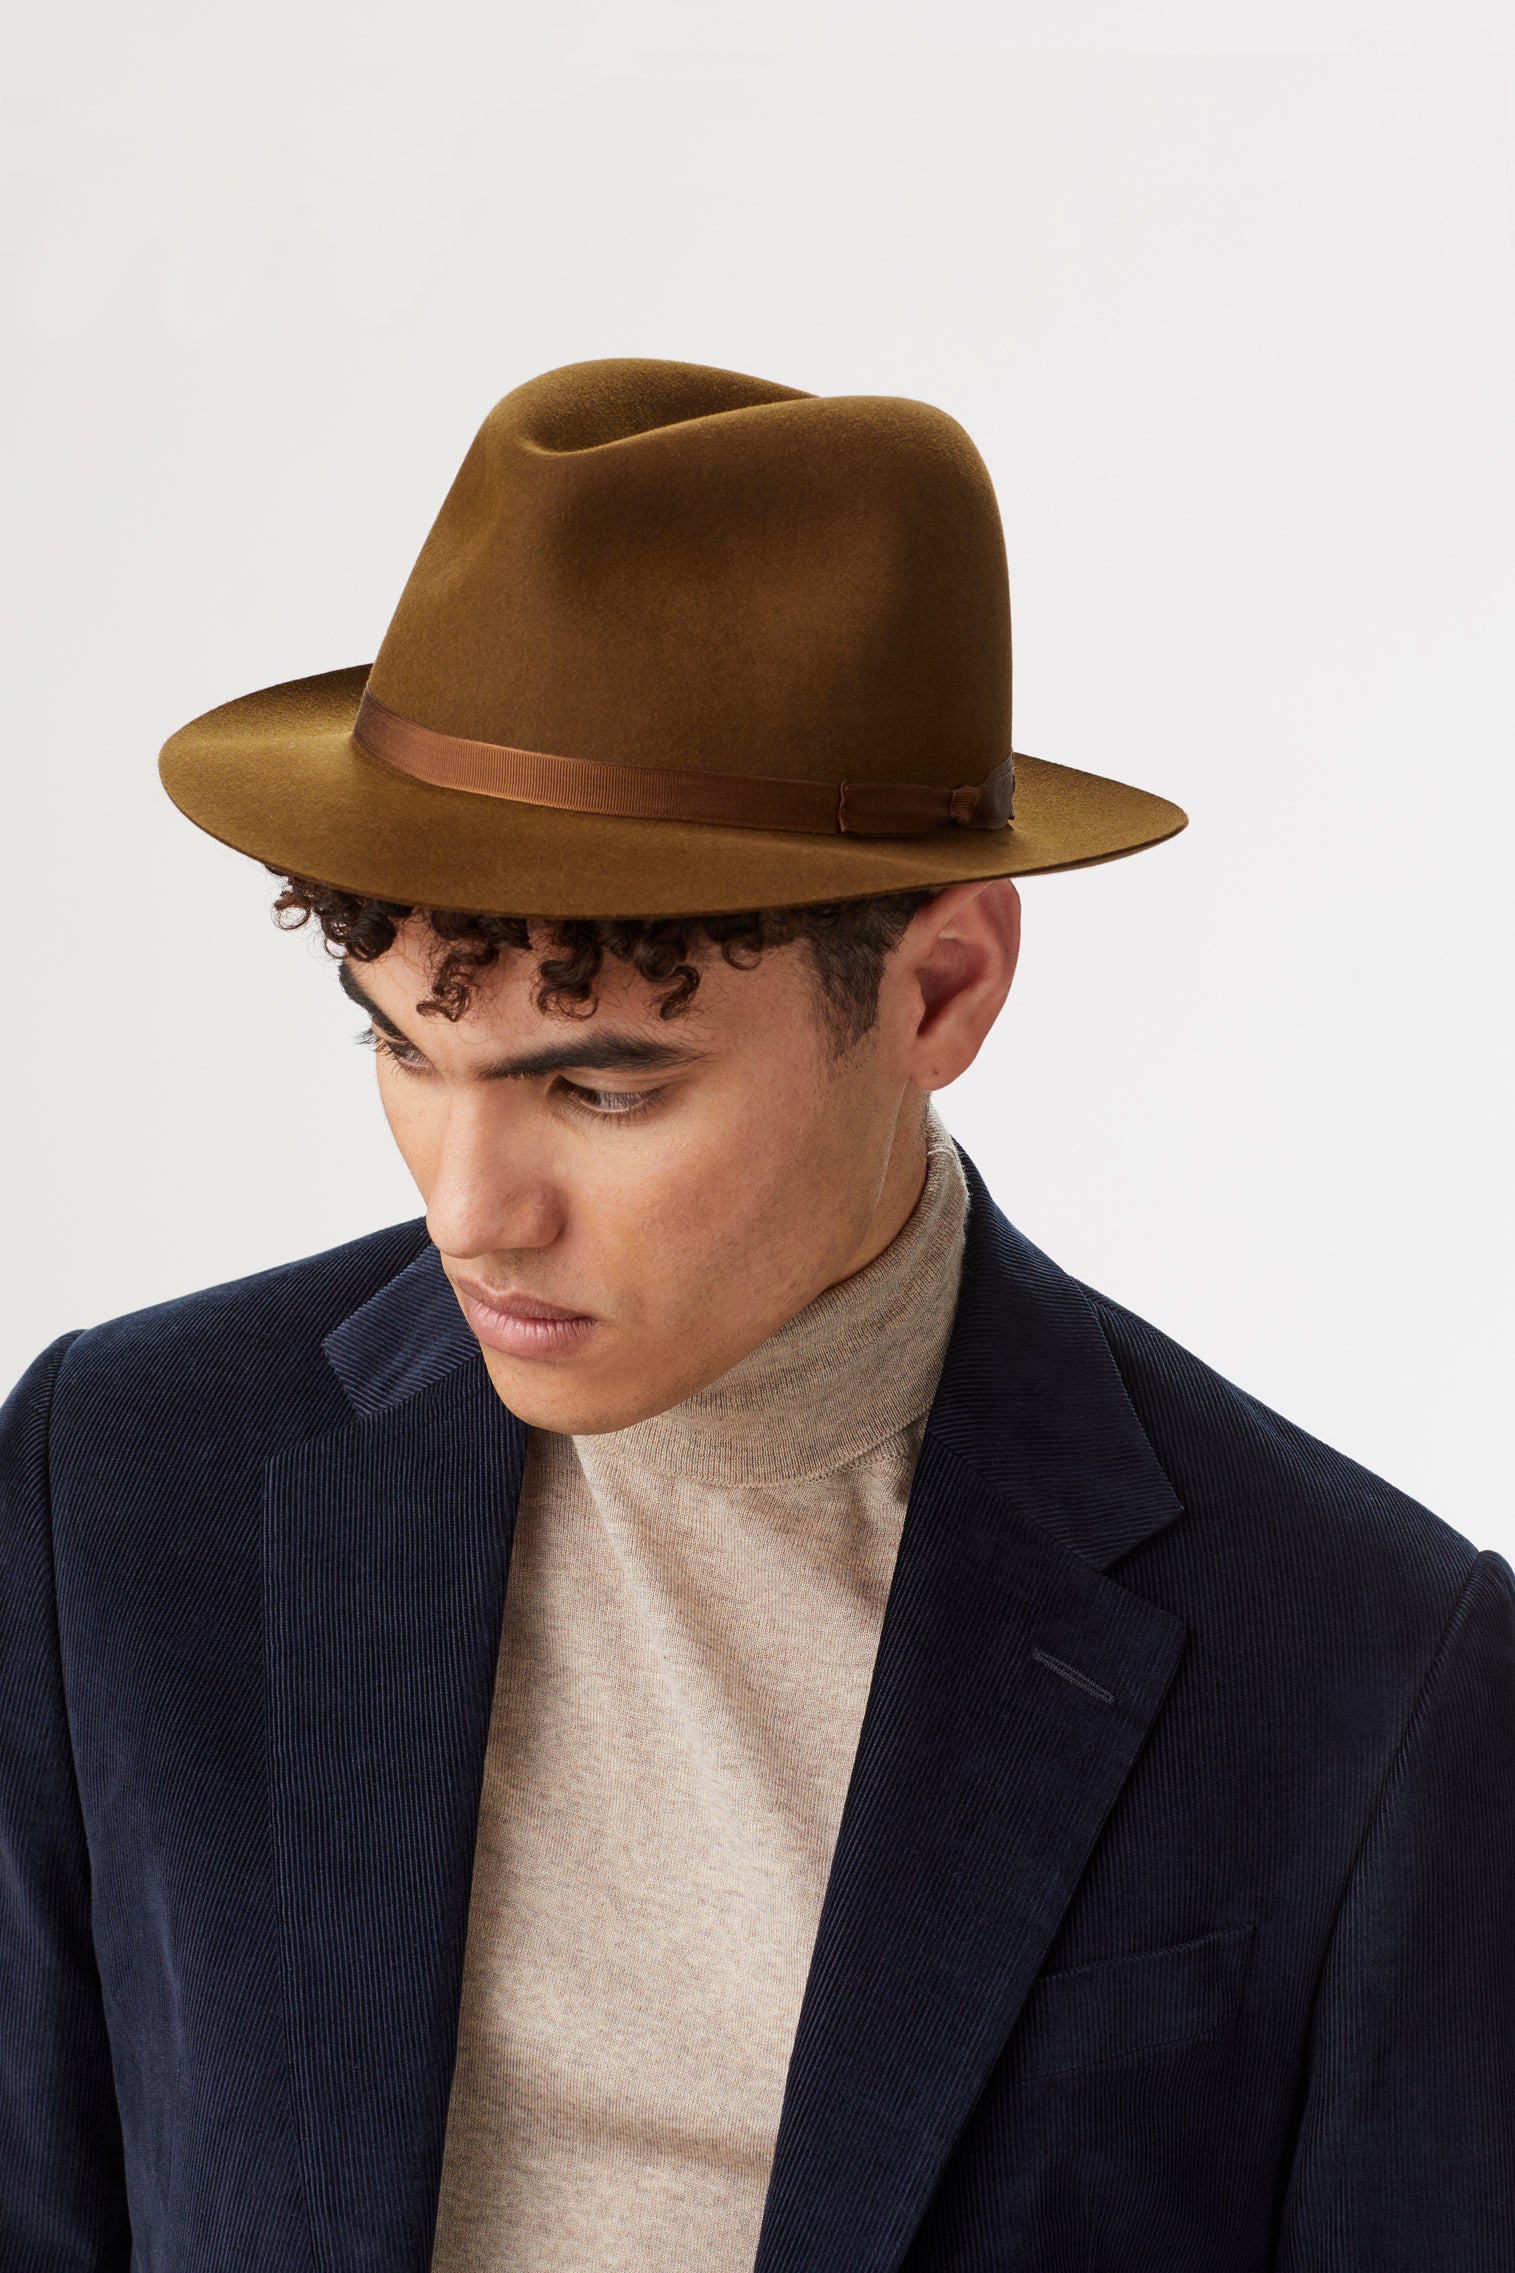 Voyager Rollable Trilby - Hats for Heart-shaped Face Shapes - Lock & Co. Hatters London UK